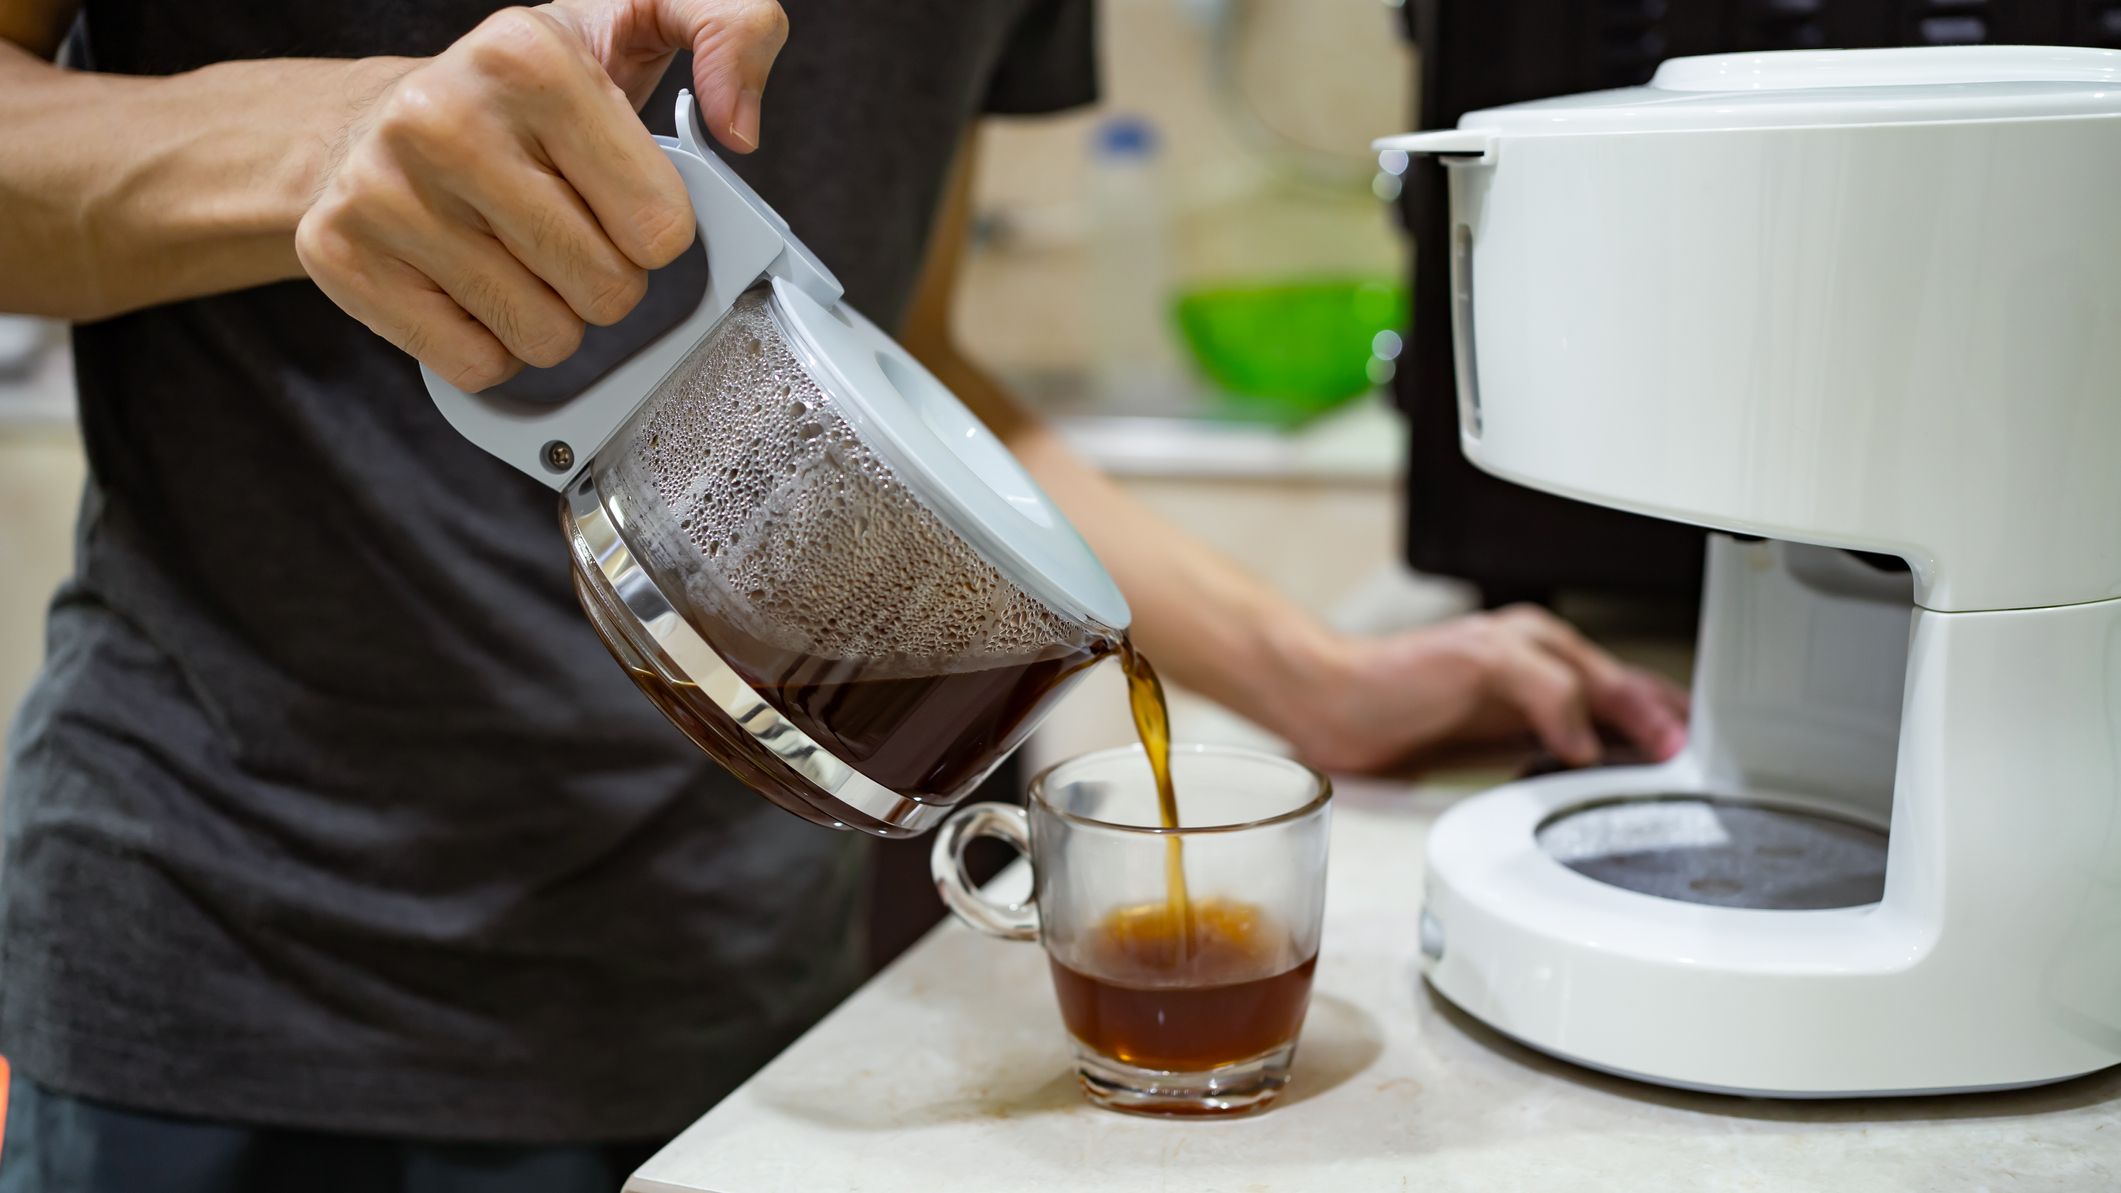 https://hips.hearstapps.com/hmg-prod/images/how-to-clean-coffee-maker-1643929801.jpg?crop=1xw:0.84375xh;center,top